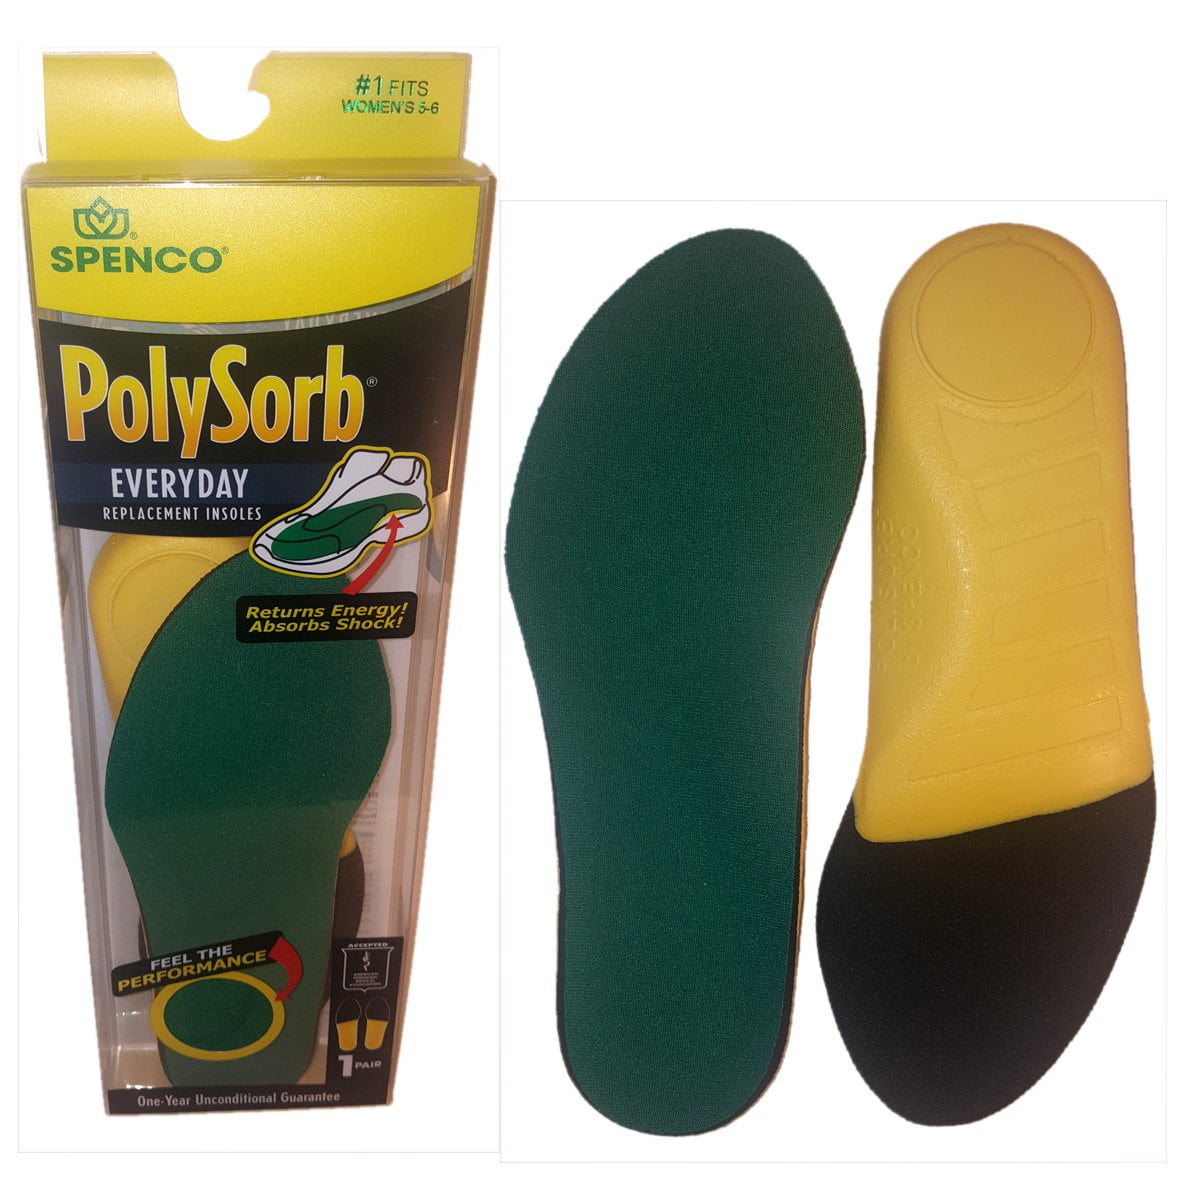 Womens 5-6 Spenco Polysorb Heavy Duty Maximum All Day Comfort and Support Shoe Insole Mens 4-5